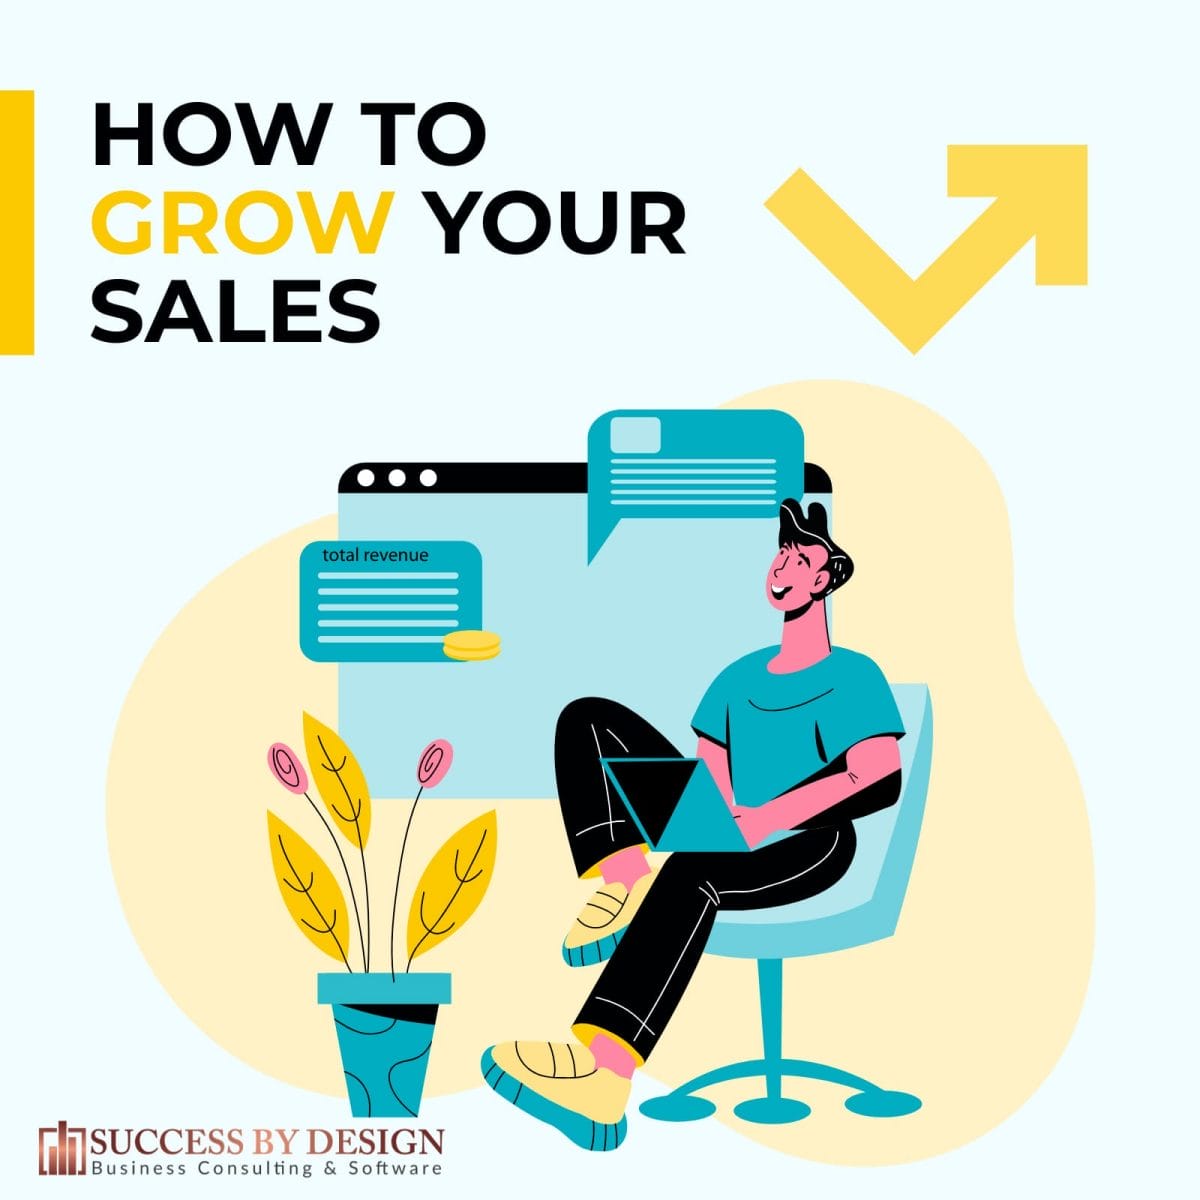 How to increase sales for Small Business